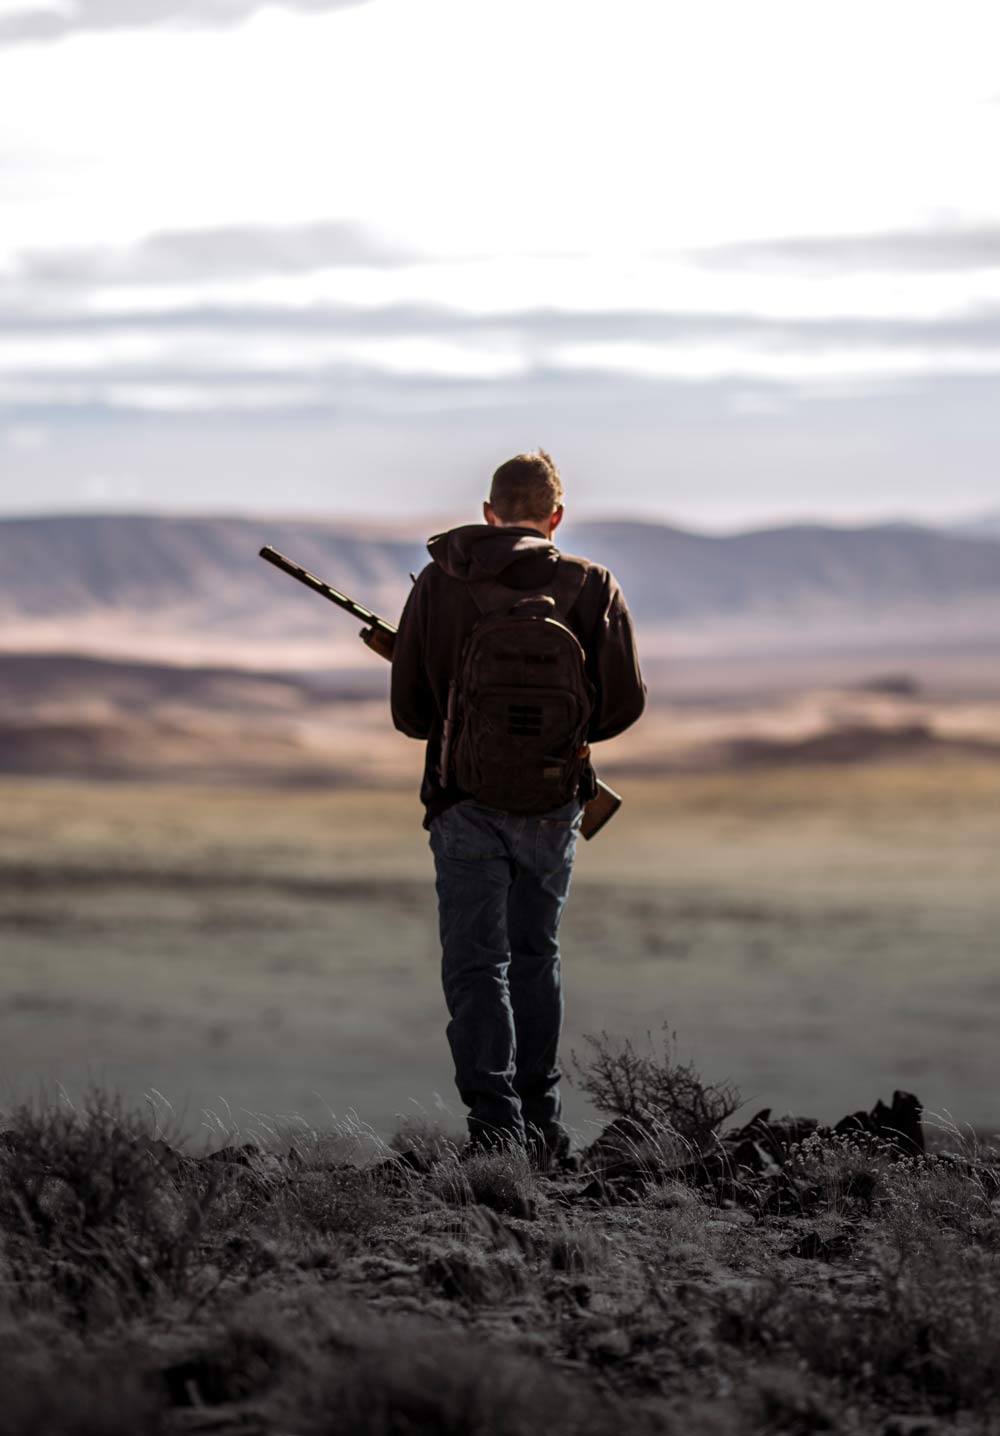 Lower Extremity Injuries Due to Hunting Incidents Involving Firearms and Other Weapons in Texas